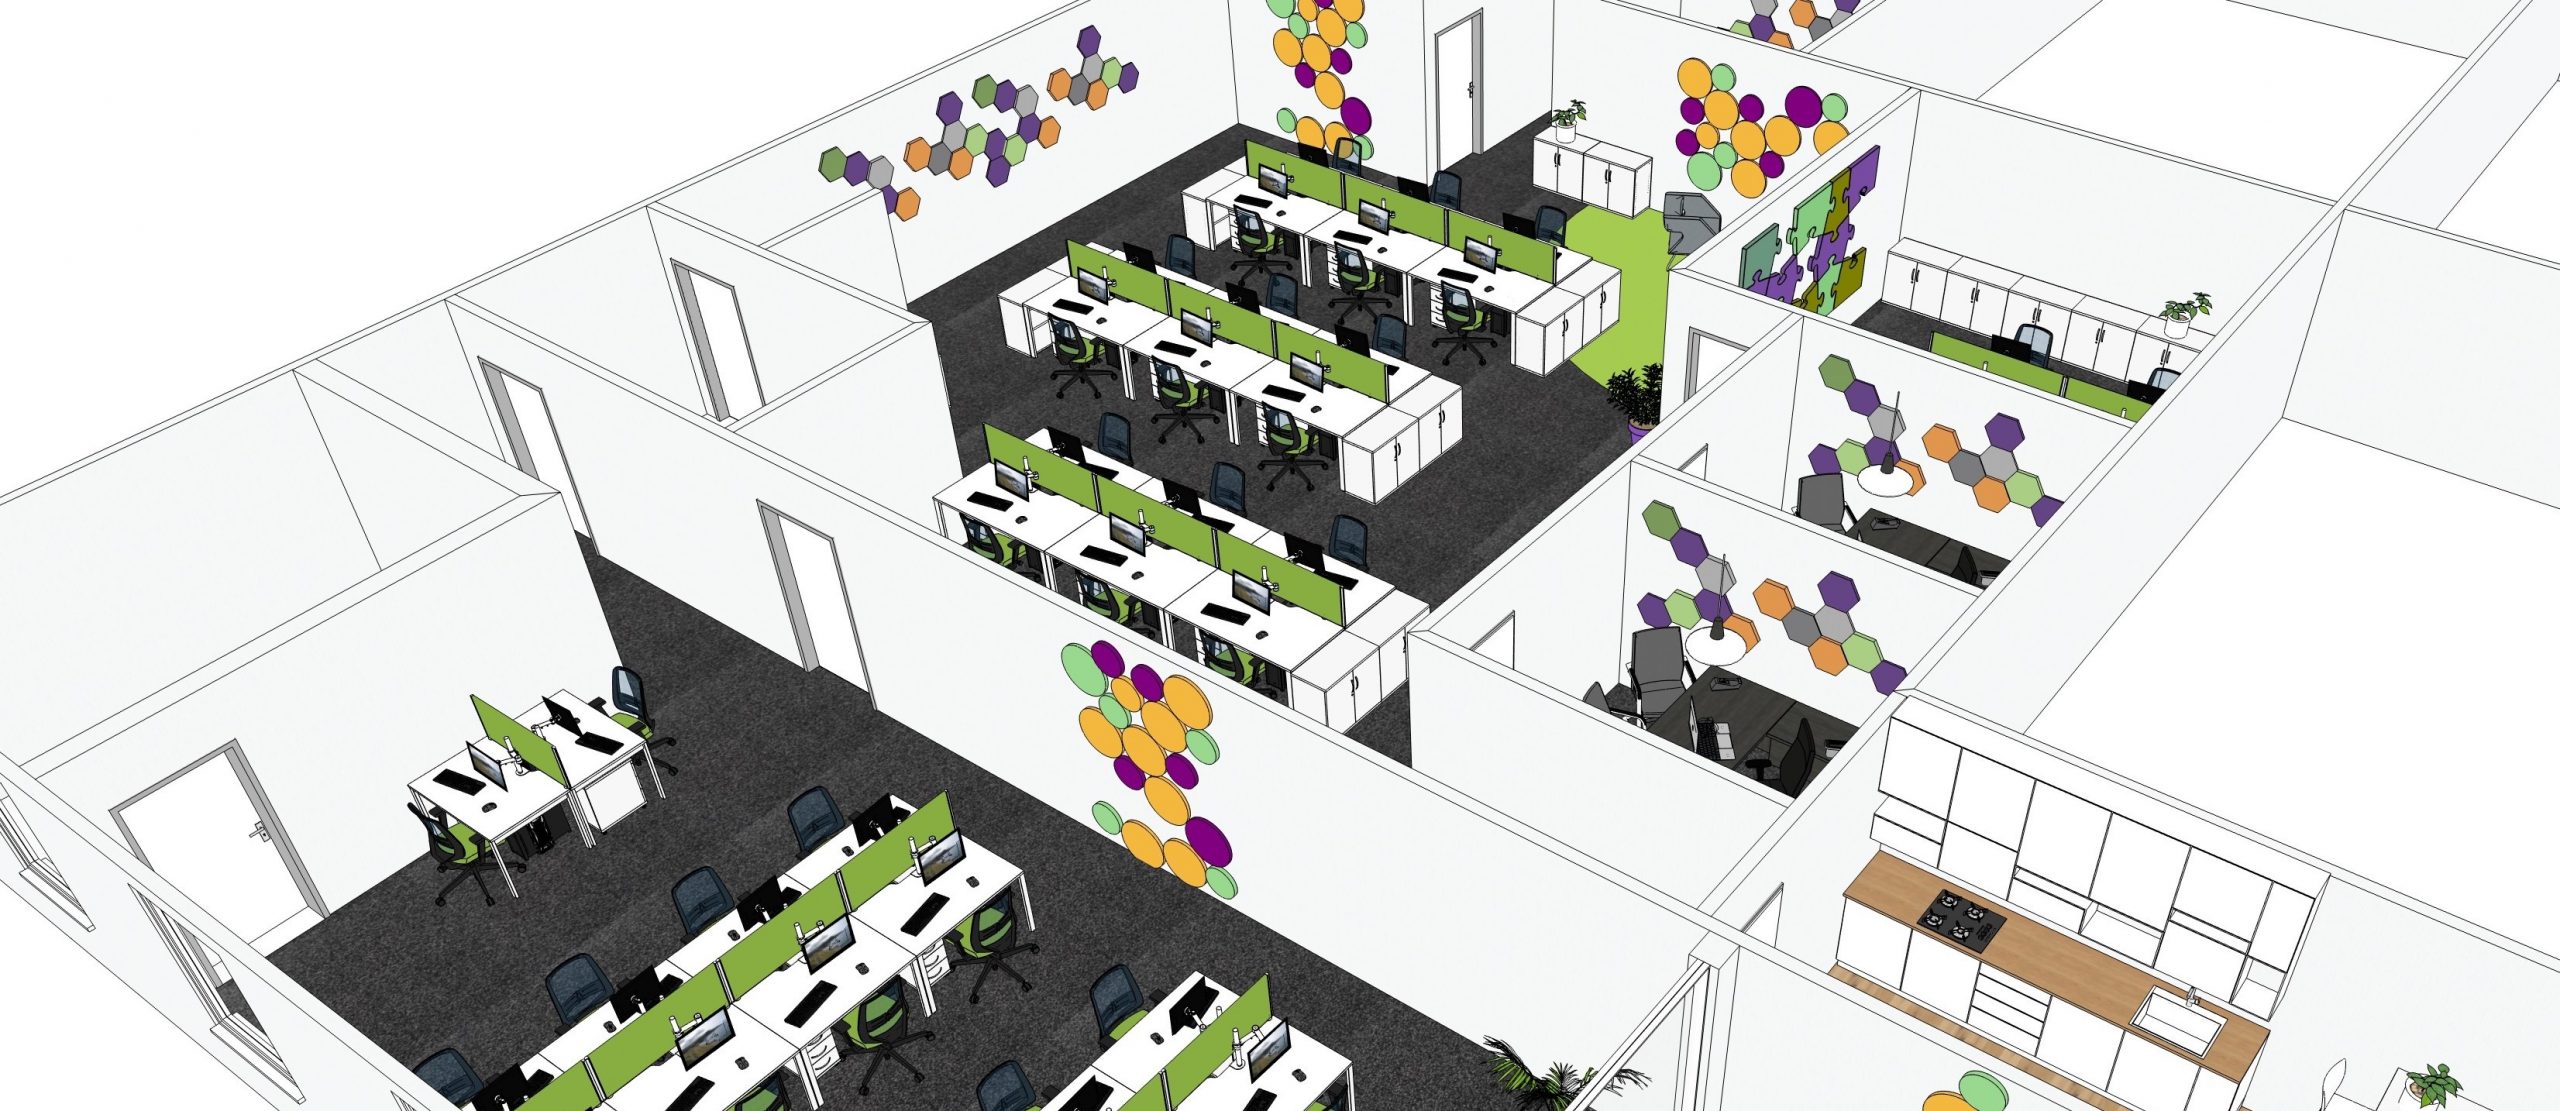 A picture of the proposed new office development at Blacknight headquarters in Carlow